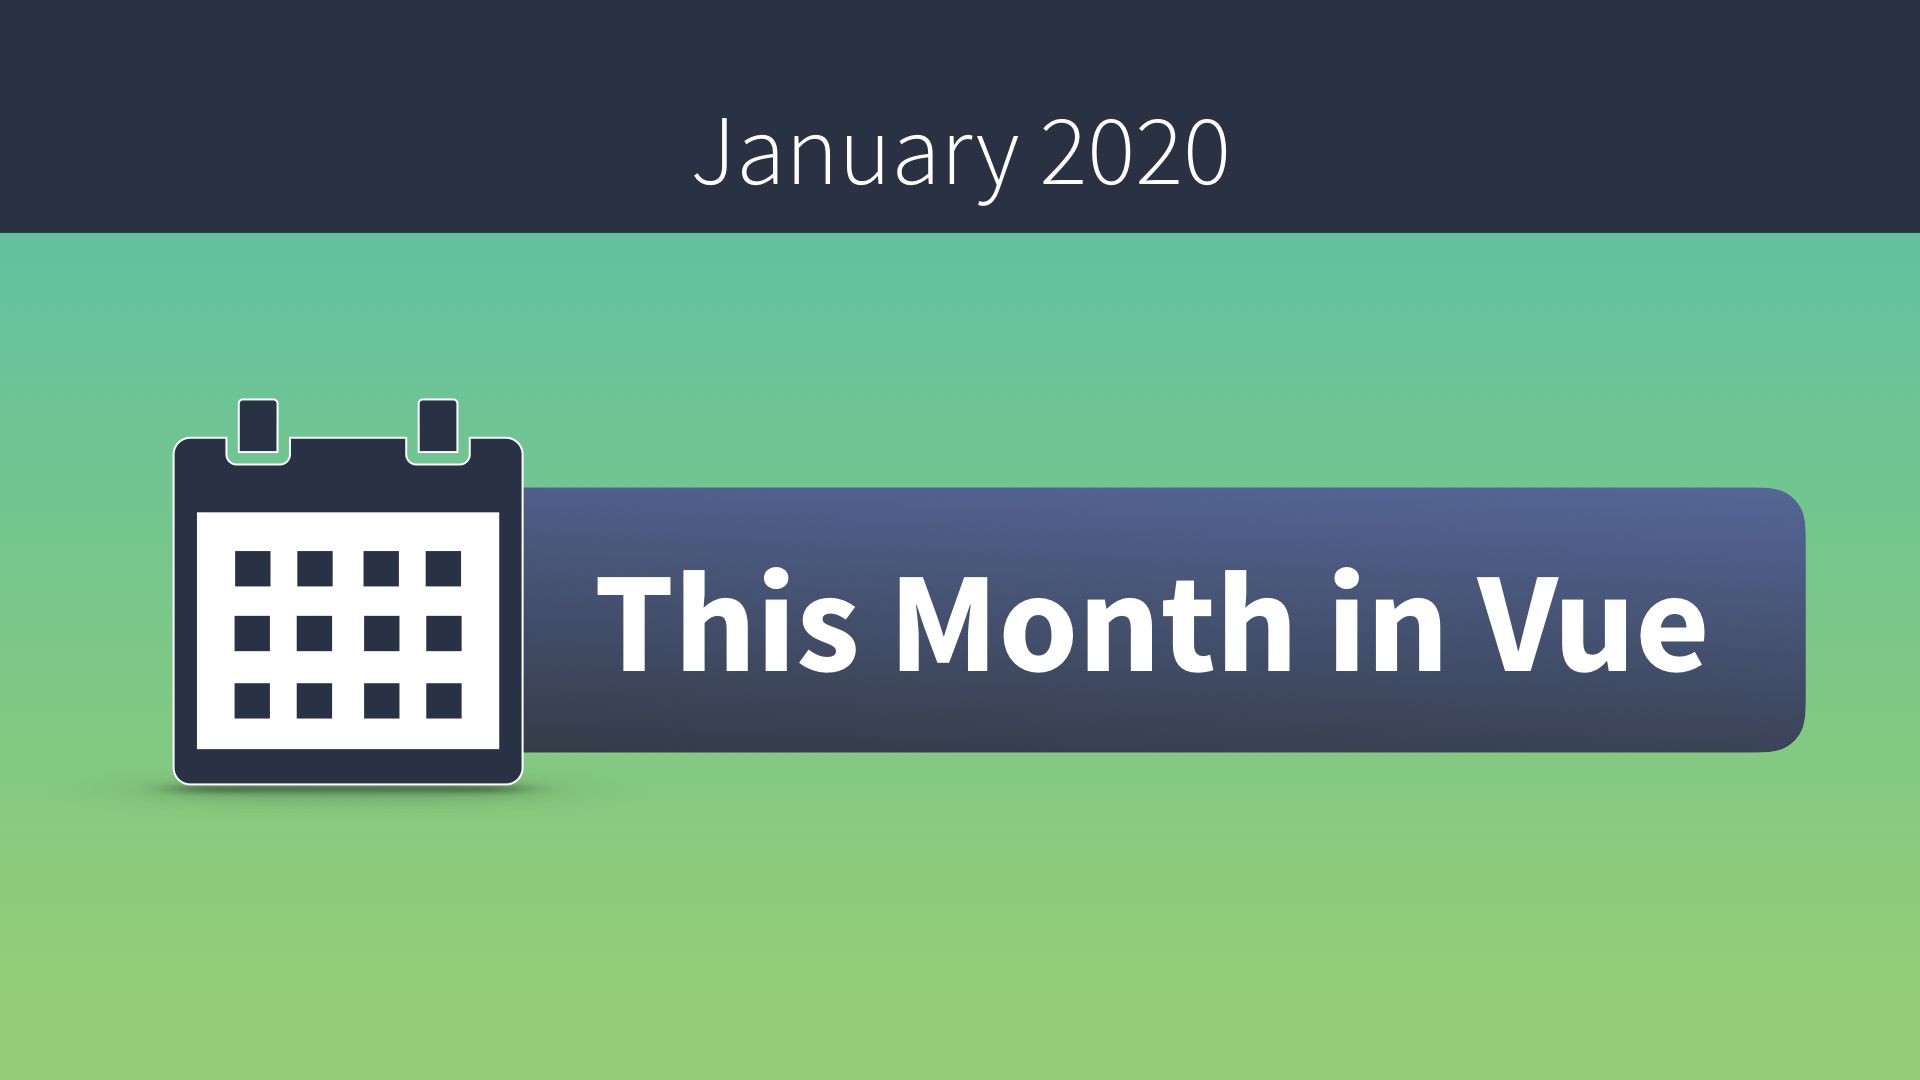 This Month in Vue - January 2020